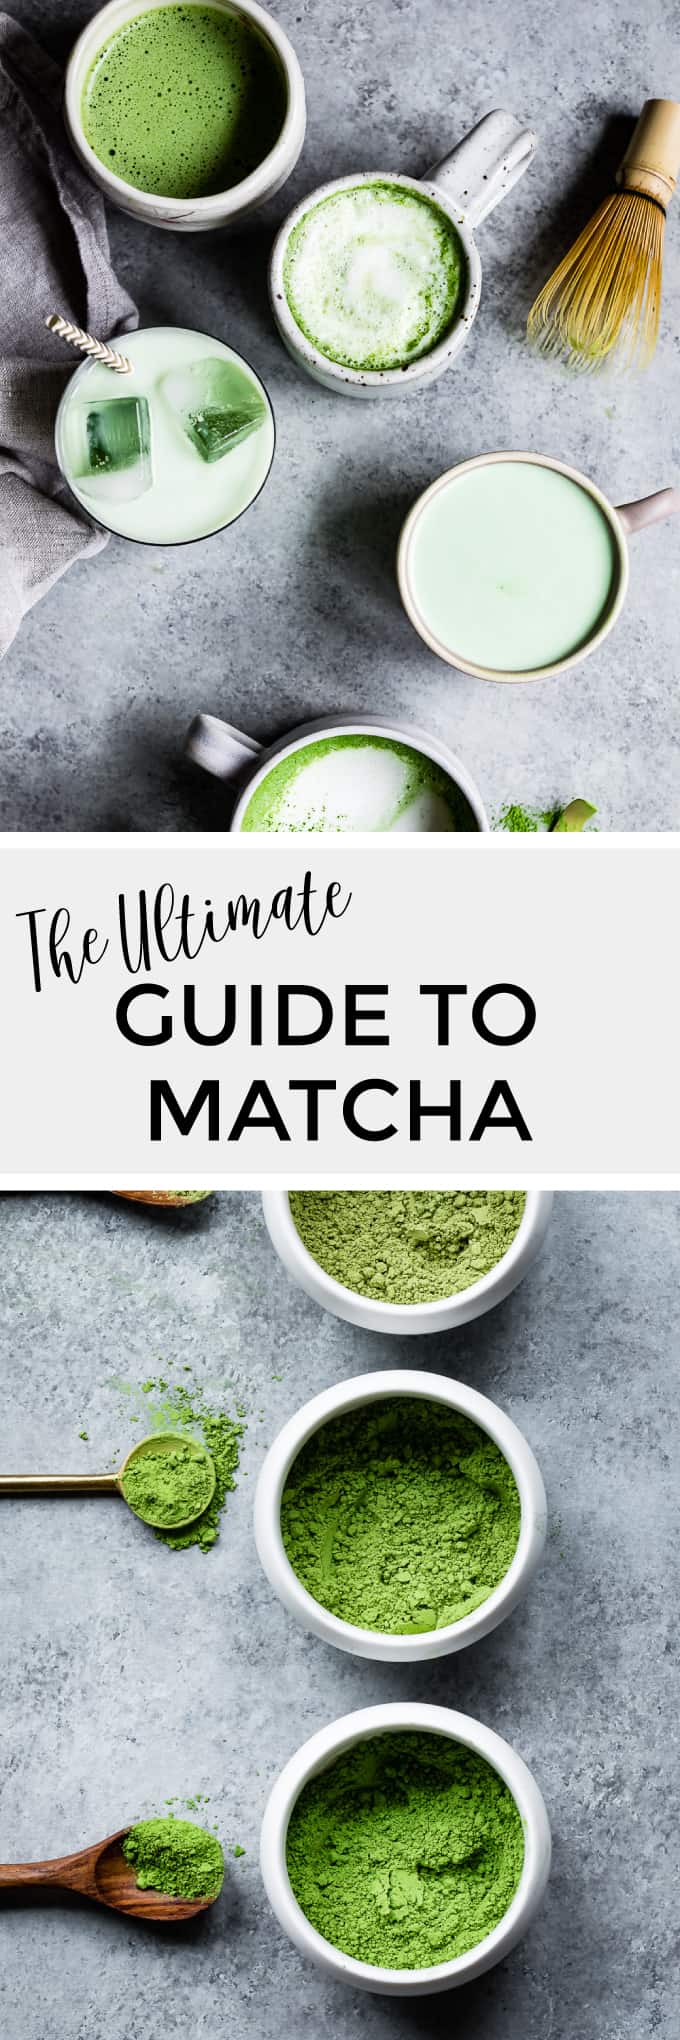 The Ultimate Guide to Matcha Green Tea: What is Matcha?